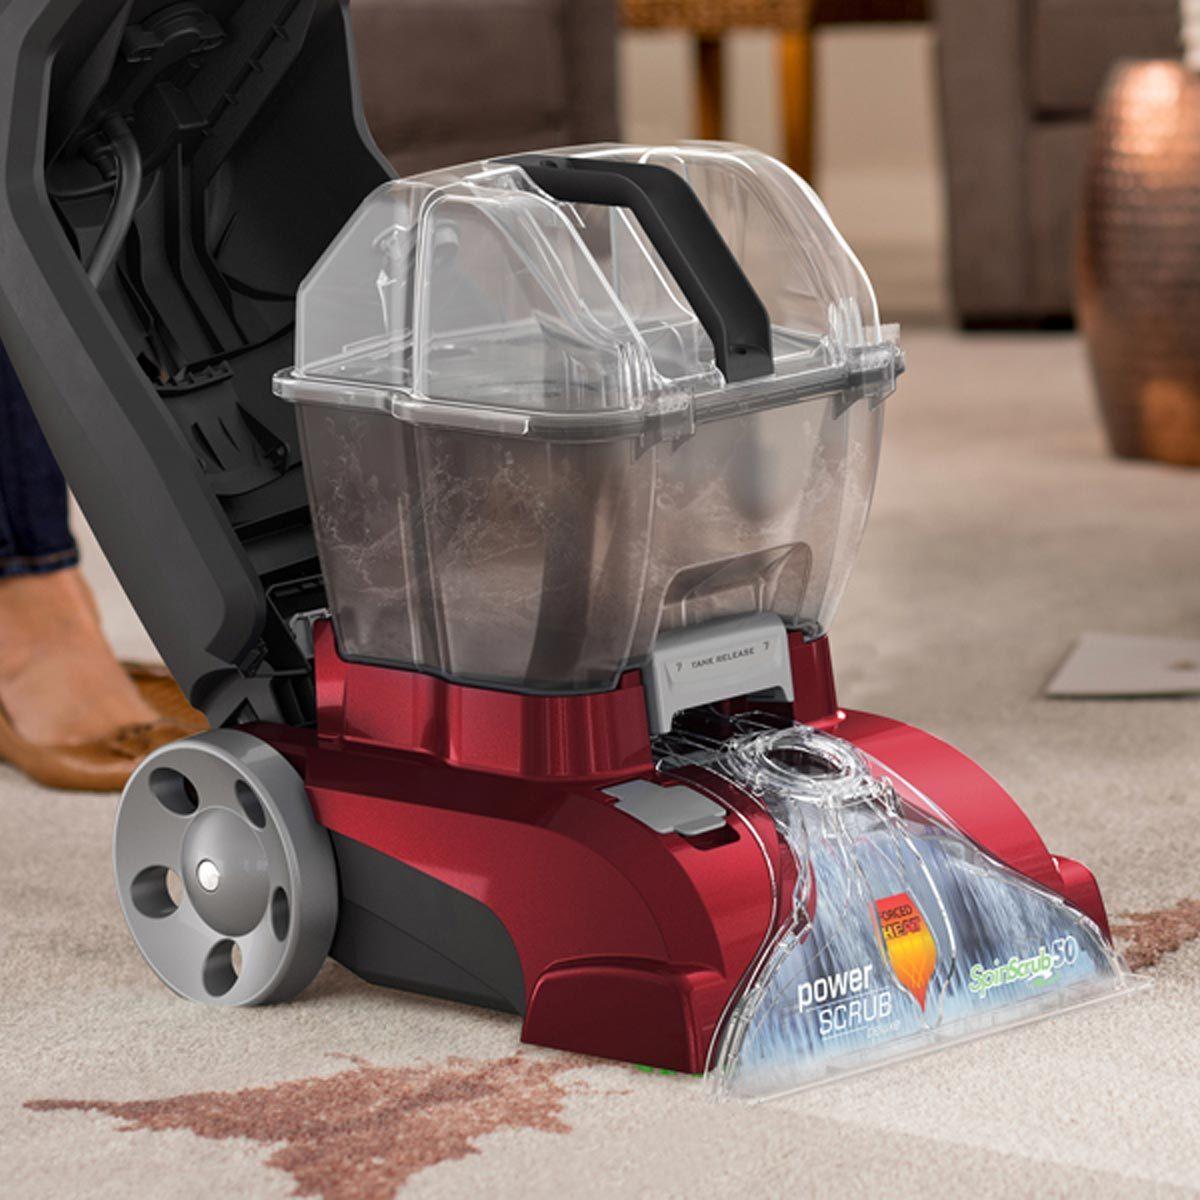 https://www.rd.com/wp-content/uploads/2023/05/Get-the-Carpet-Scrubber-Over-47000-Shoppers-Call-a-Beast-At-Its-Lowest-Price-EVER_FT_via-amazon.com_.jpg